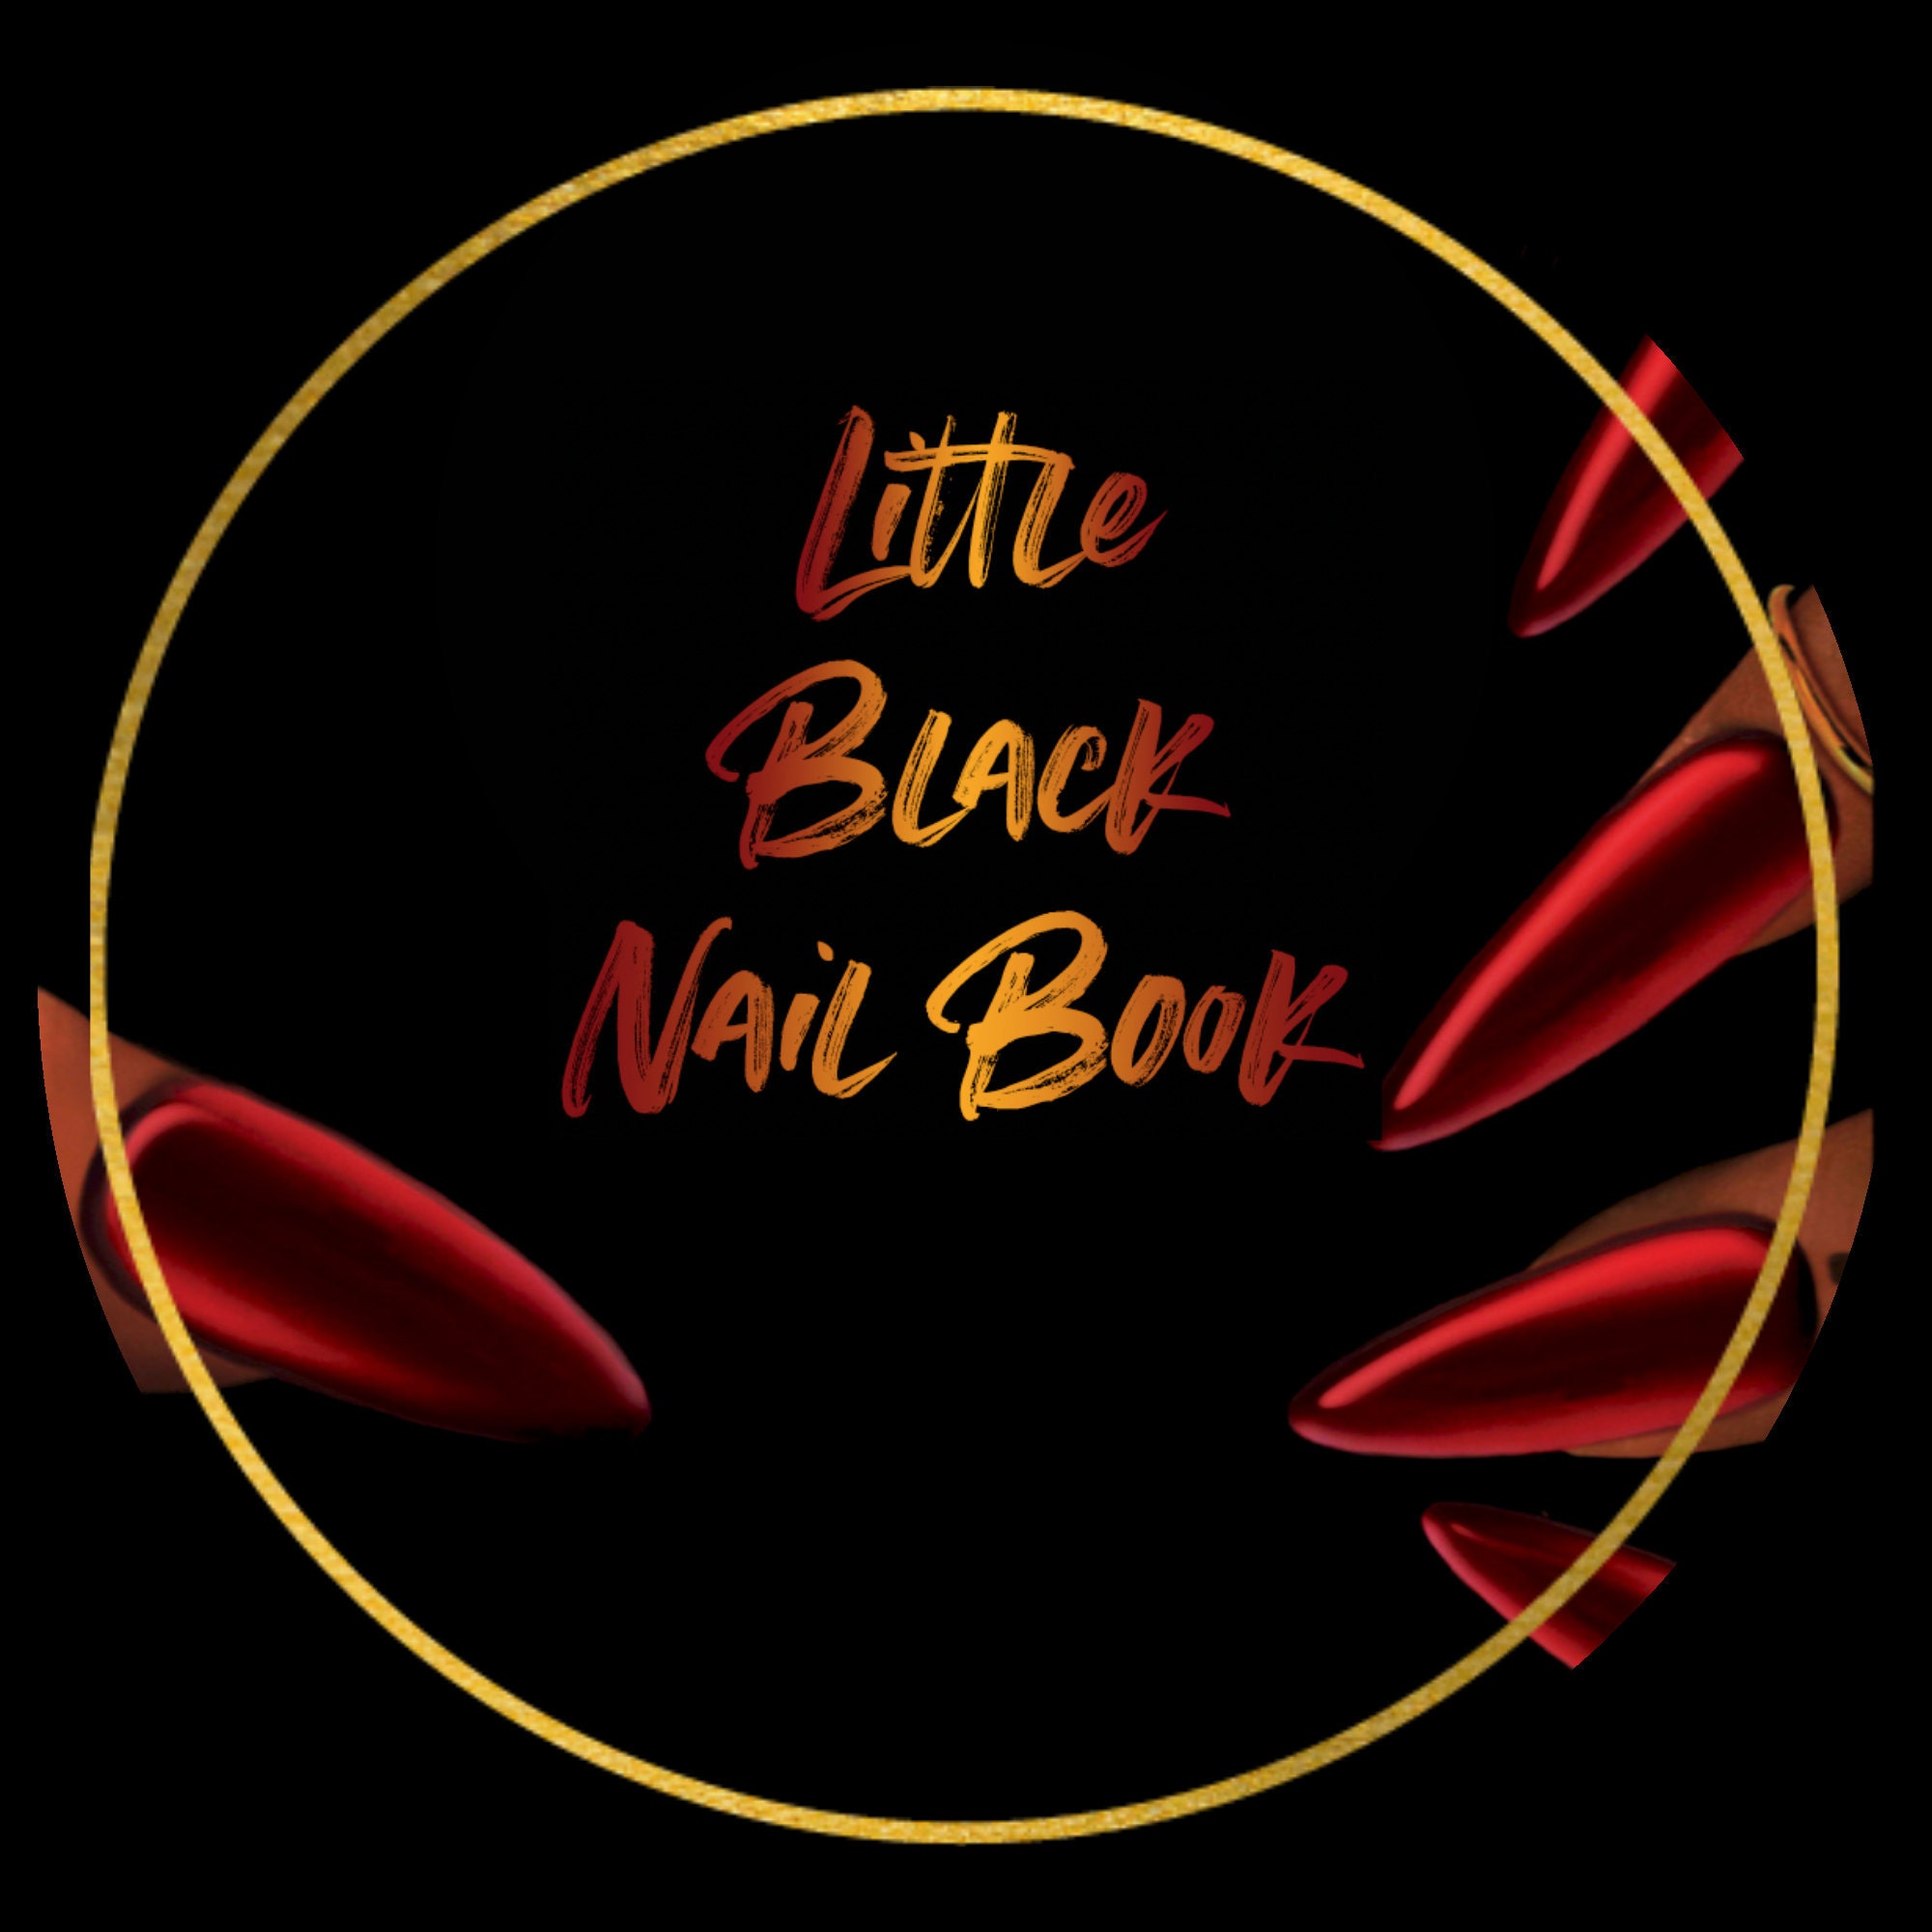 Little Black Nail Book Bundle Unboxing, New Bling Book